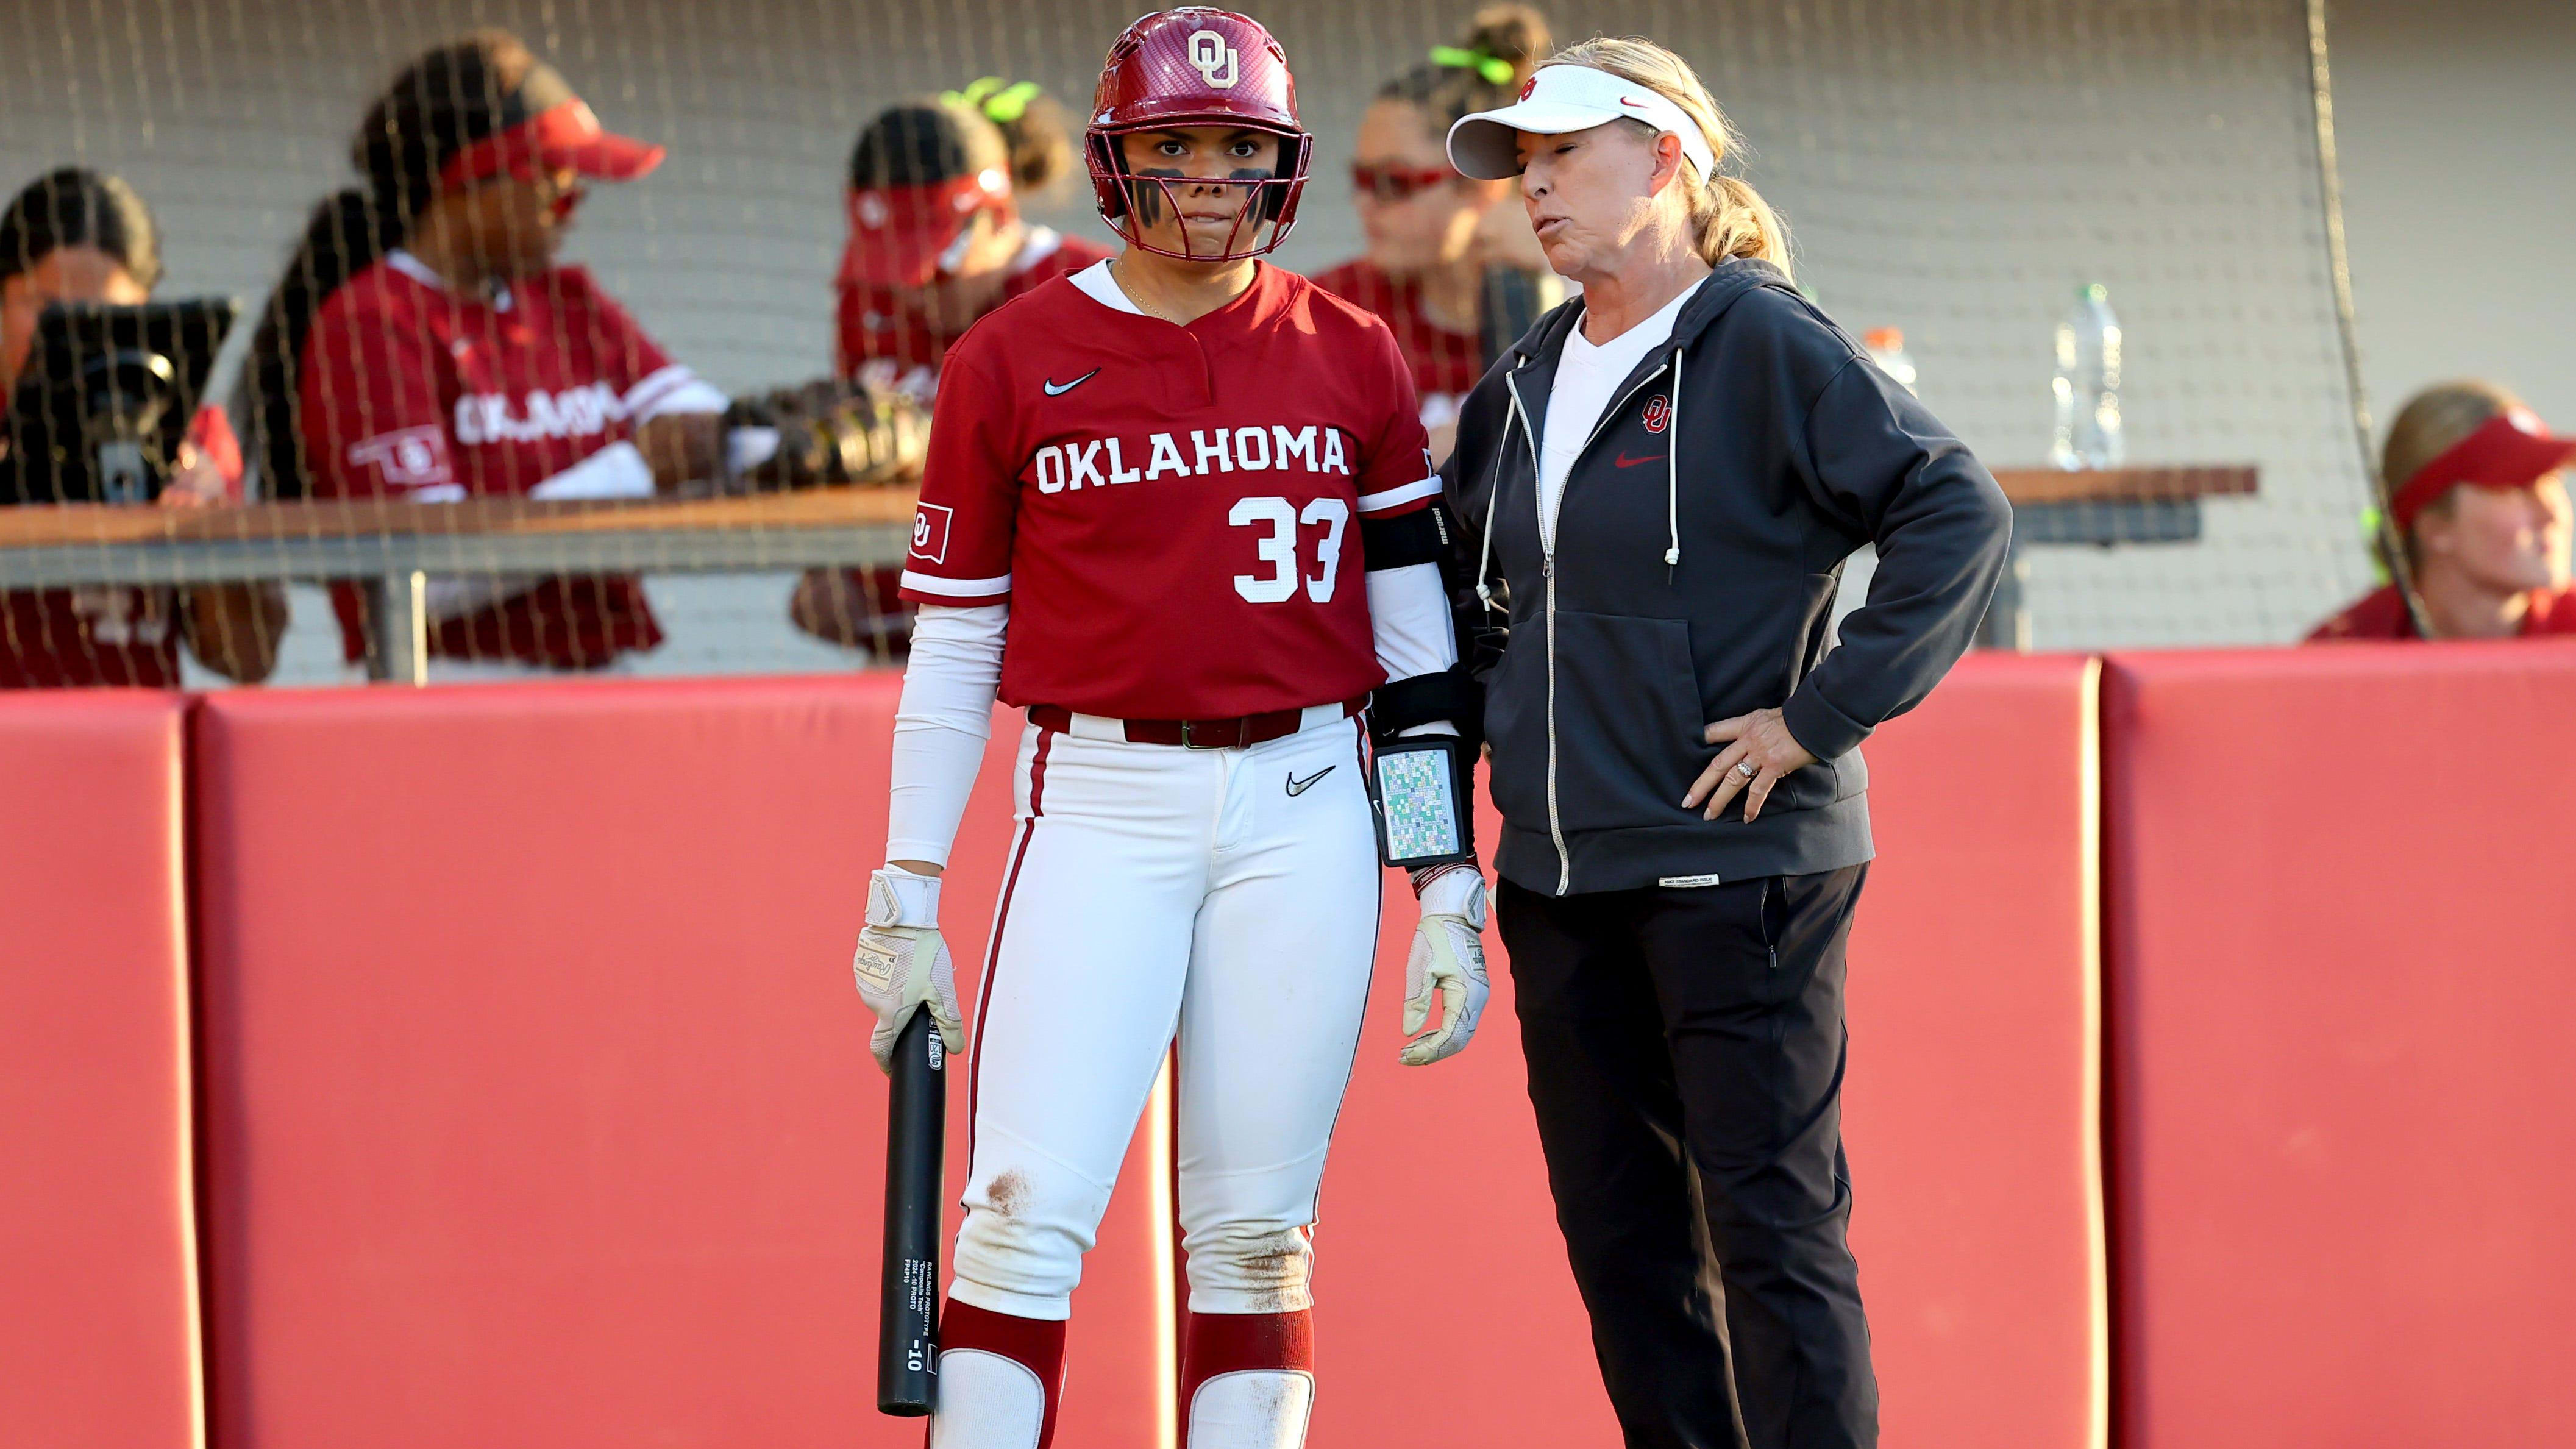 BYU Dominates Oklahoma in Softball with 9-4 Win, Series Finale Saturday